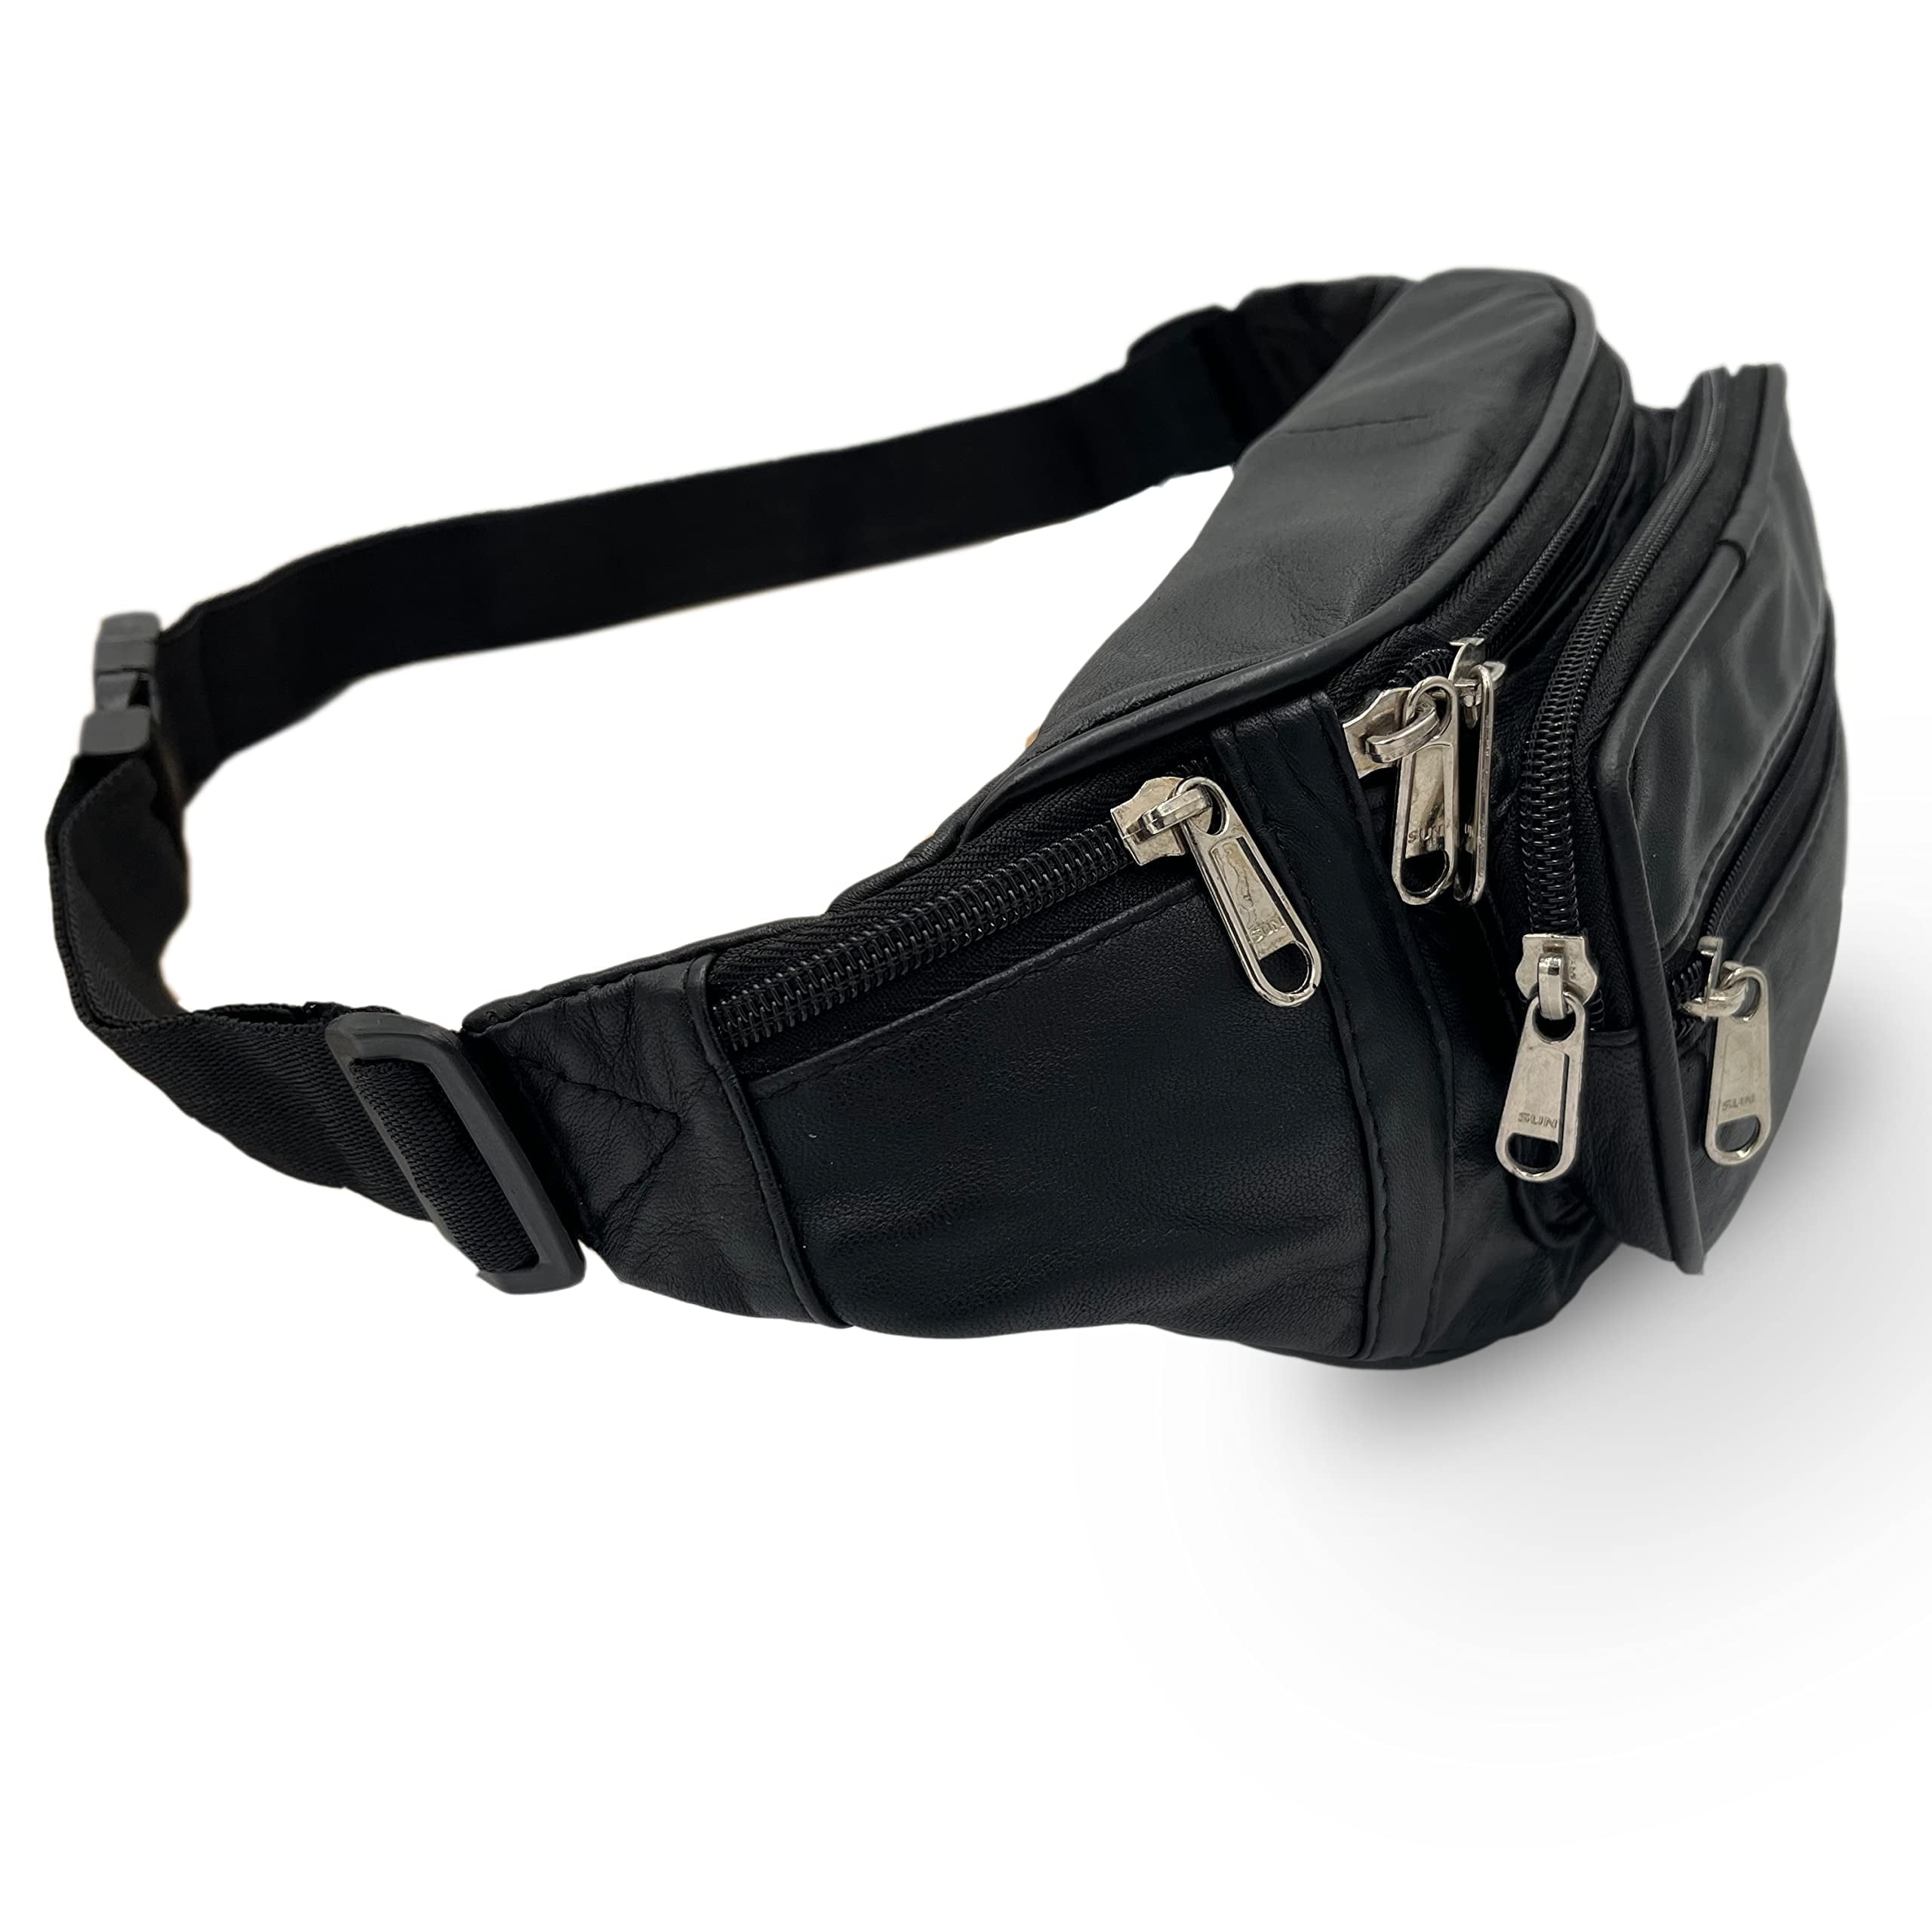 2.5 LITER TRAIL MIX FANNY PACK - IN STOCK